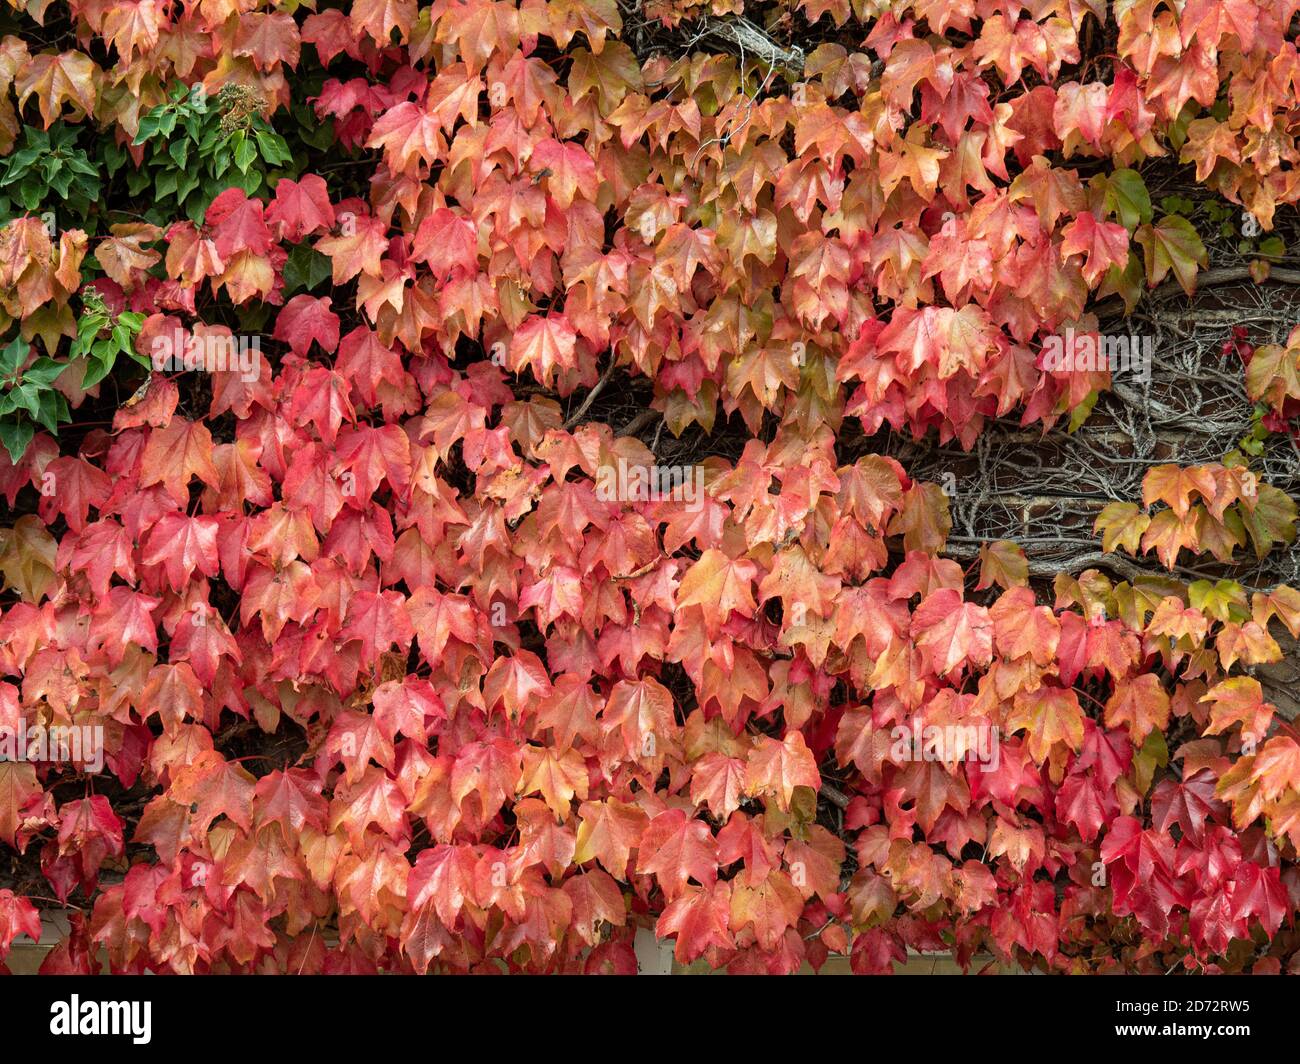 Part of a wall covered in the bright red autumn leaves of a Boston Ivy - Parthenocissus tricuspidata Stock Photo